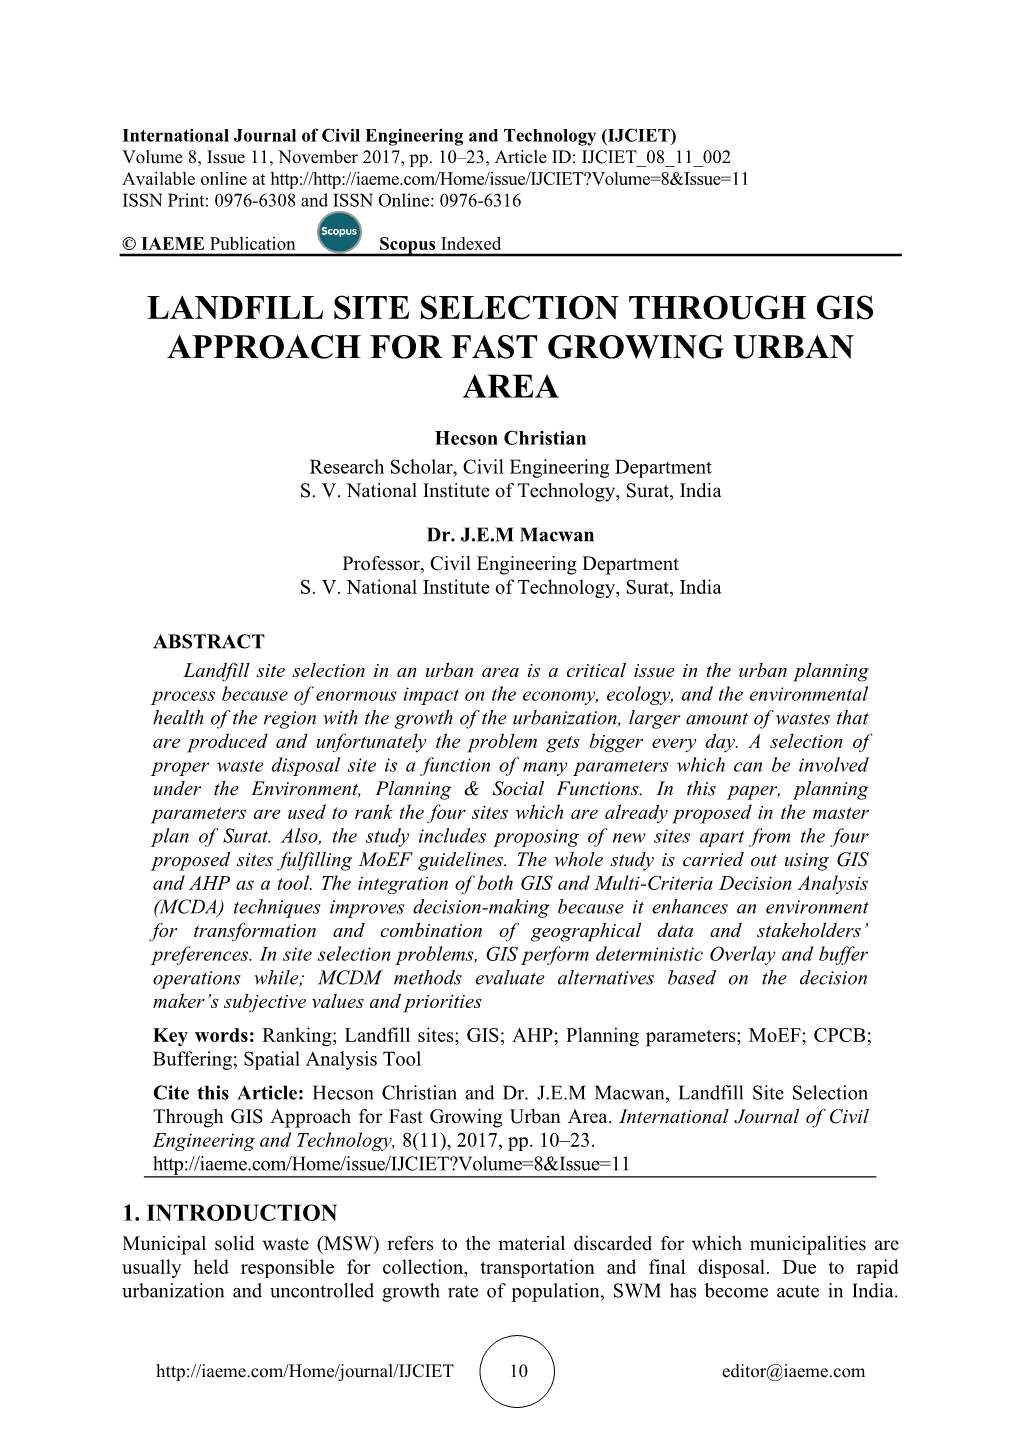 Landfill Site Selection Through Gis Approach for Fast Growing Urban Area